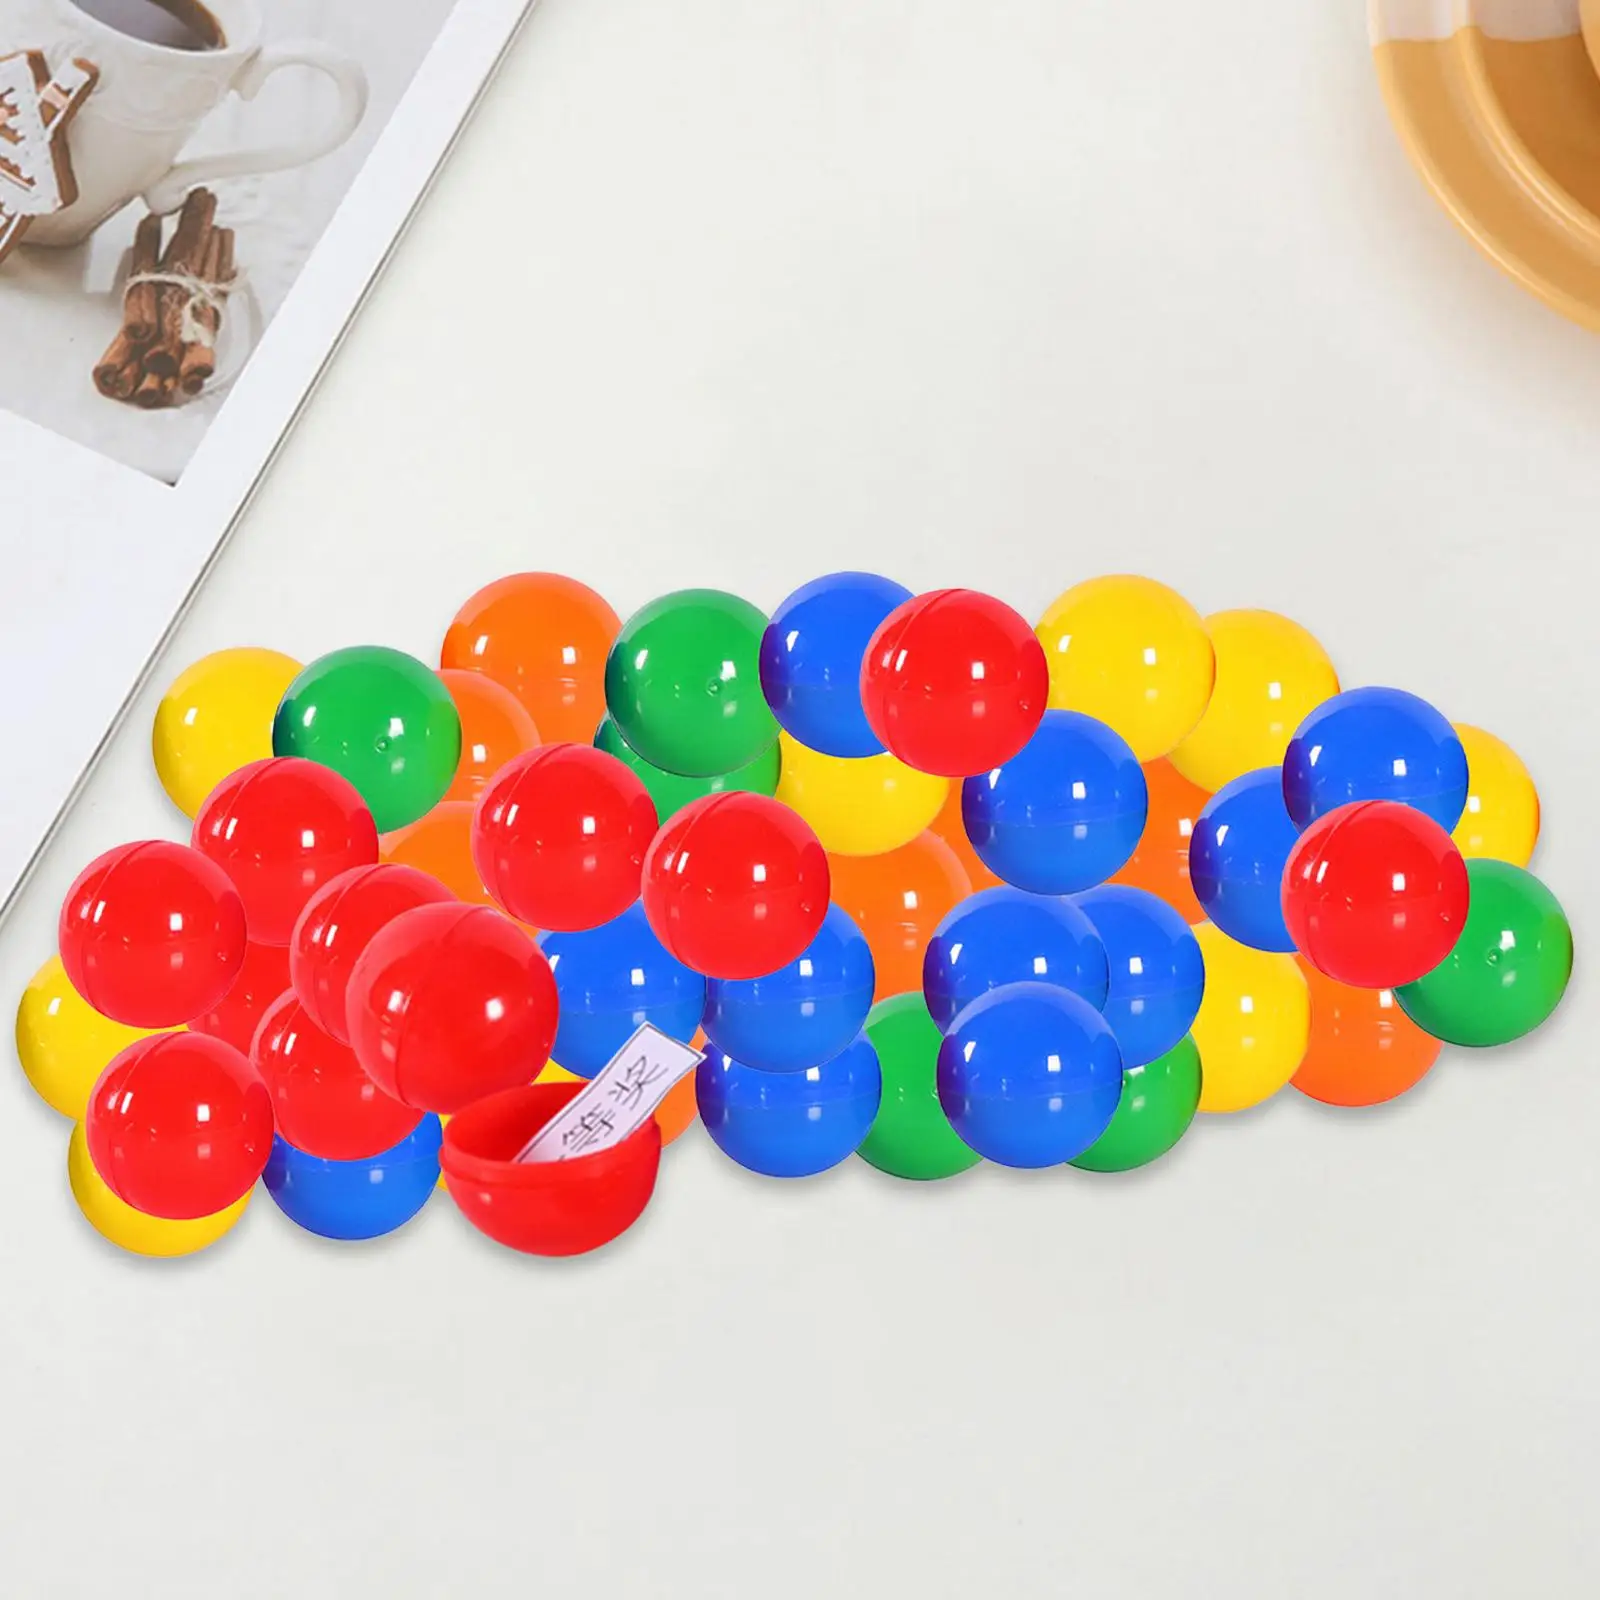 50Pcs Bingo Ball Opening Portable Direct Replaces Accessories Lottery Balls for